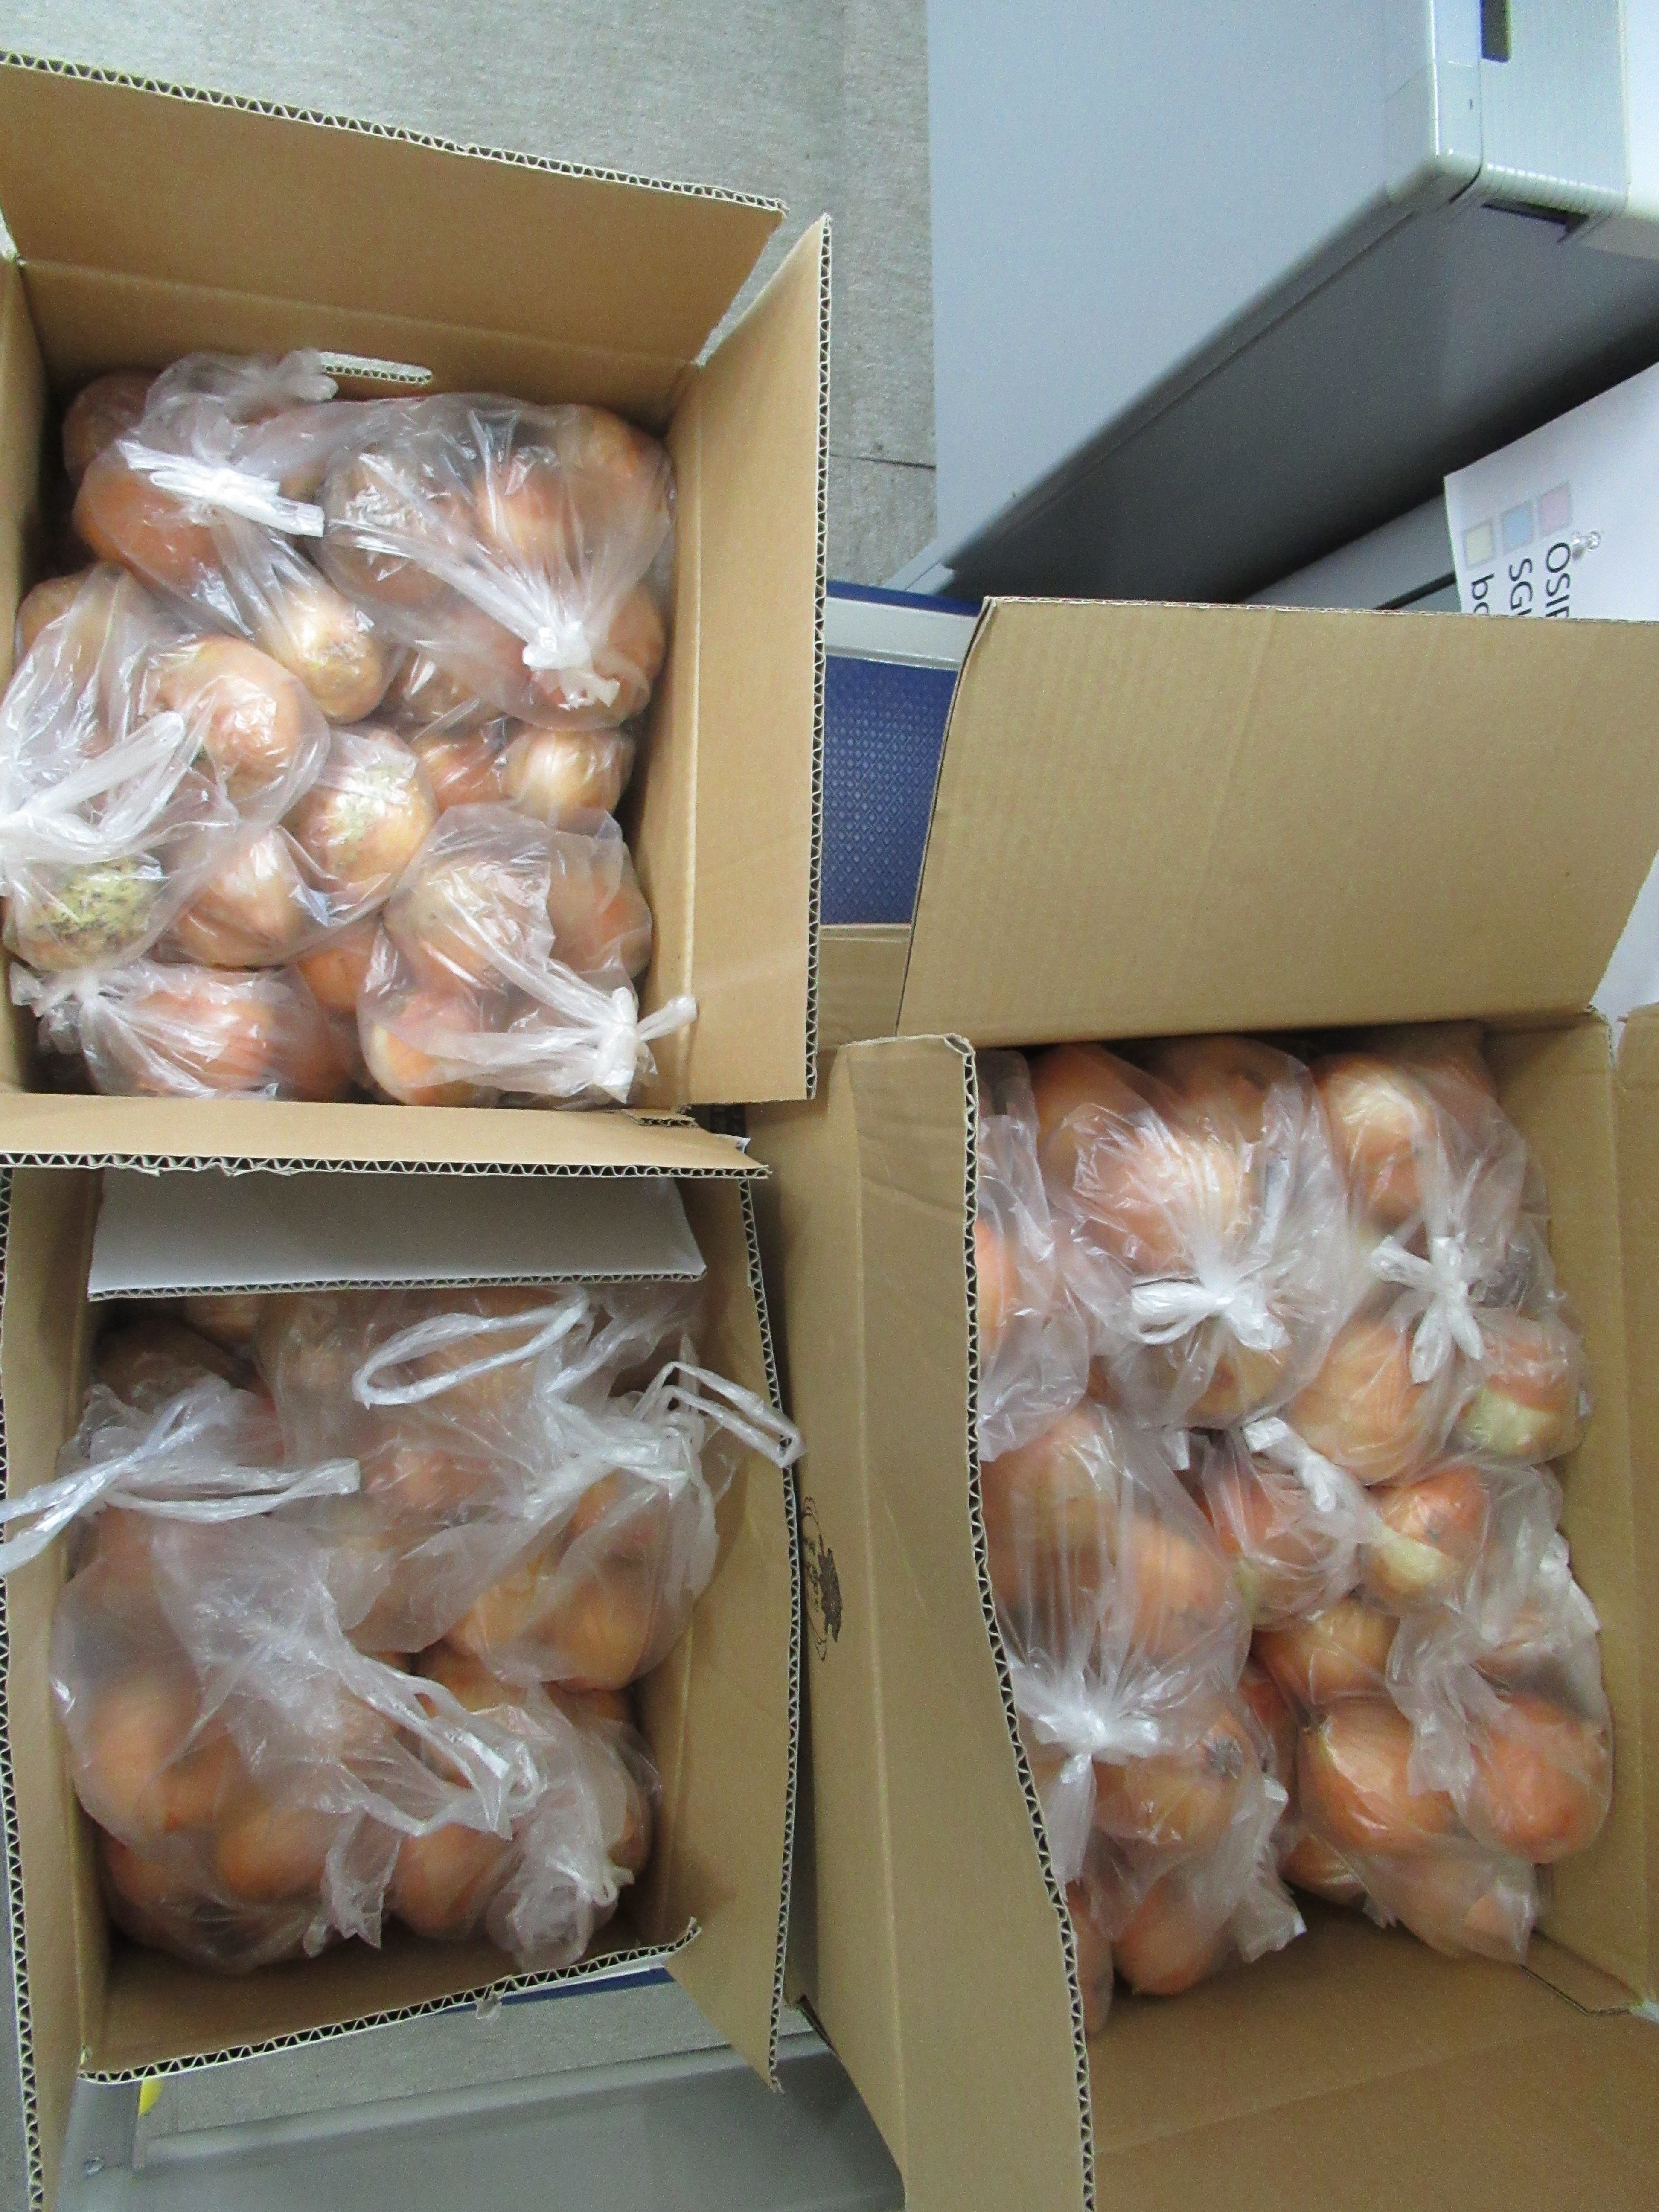 Asada-san donated vegetables (onion)  to the international students